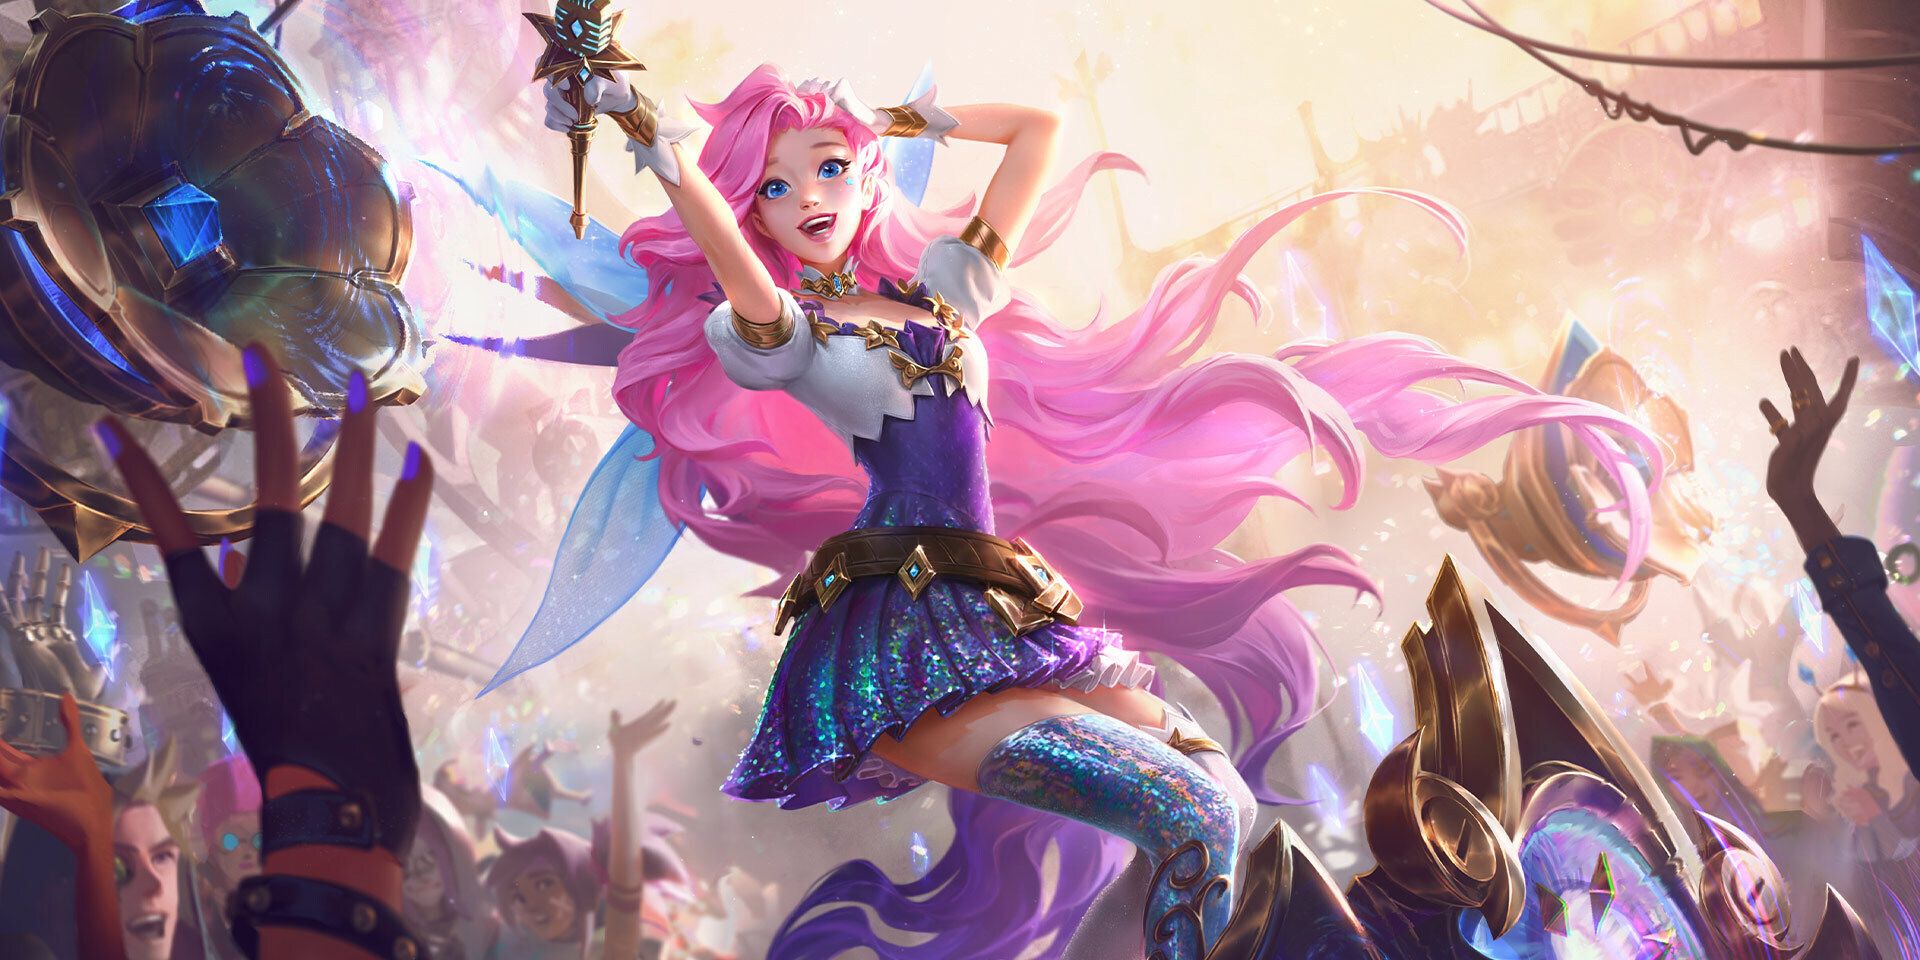 How to Use Seraphine’s Abilities in League of Legends